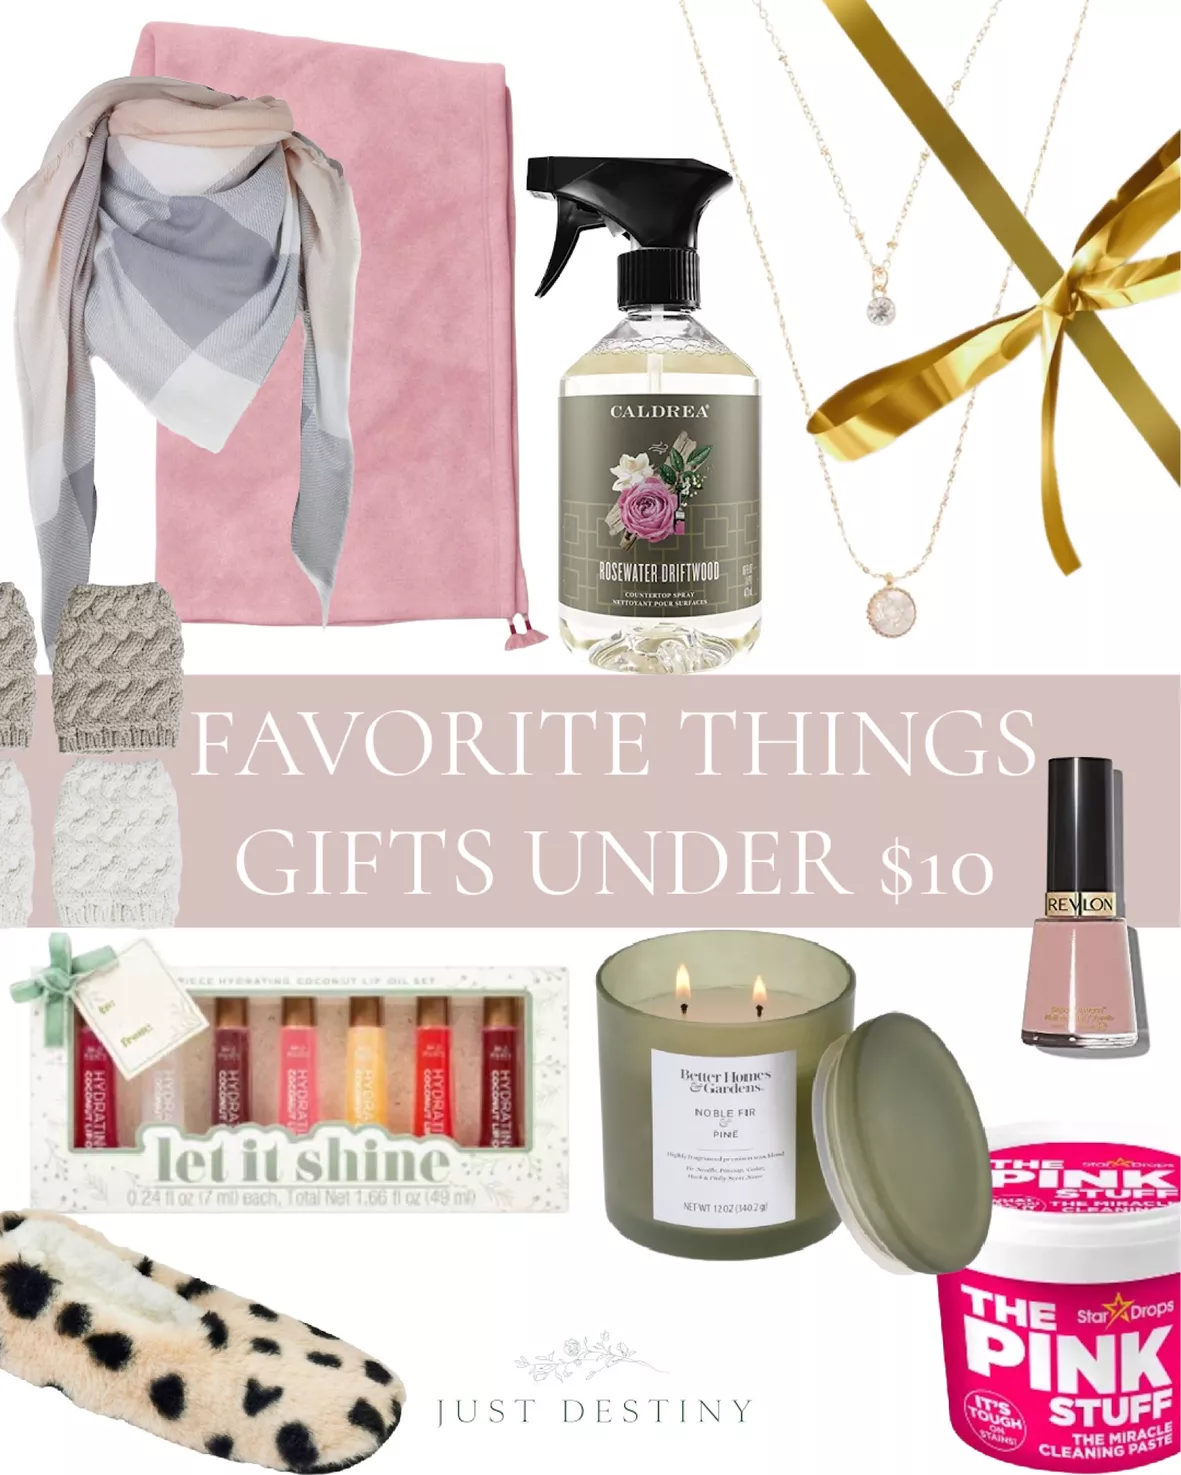 Favorite Things Party Gift Ideas Under $10